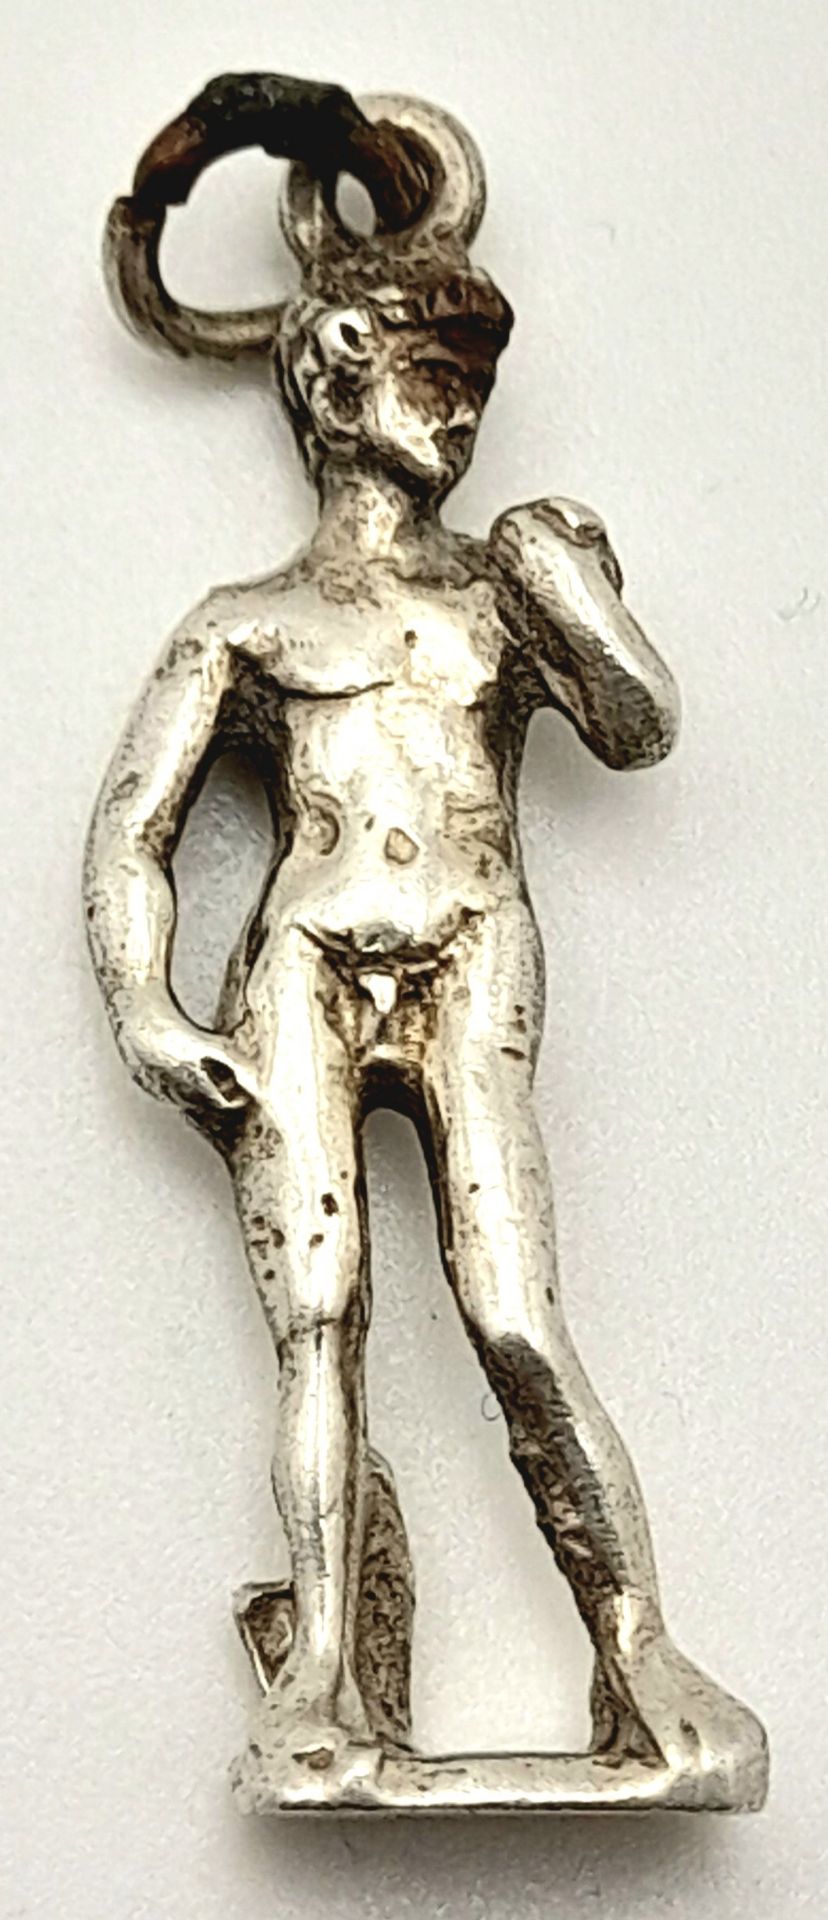 A STERLING SILVER MICHELANGELO'S DAVID STATUE CHARM. 3.5cm length, 3.6g weight. Ref: SC 8125